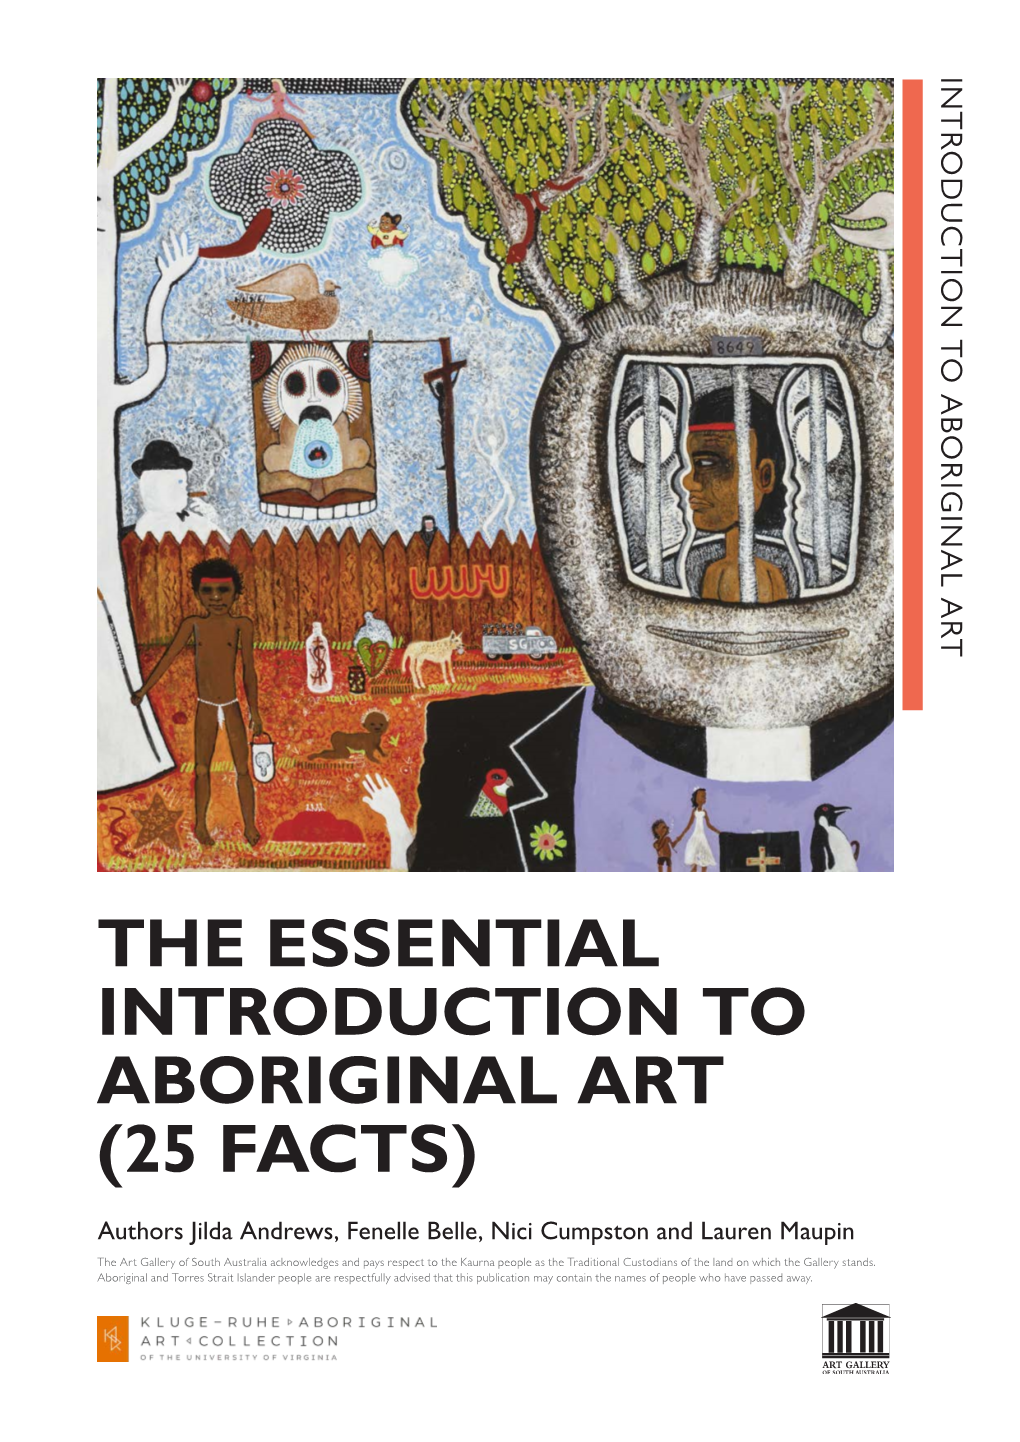 The Essential Introduction to Aboriginal Art (25 Facts)